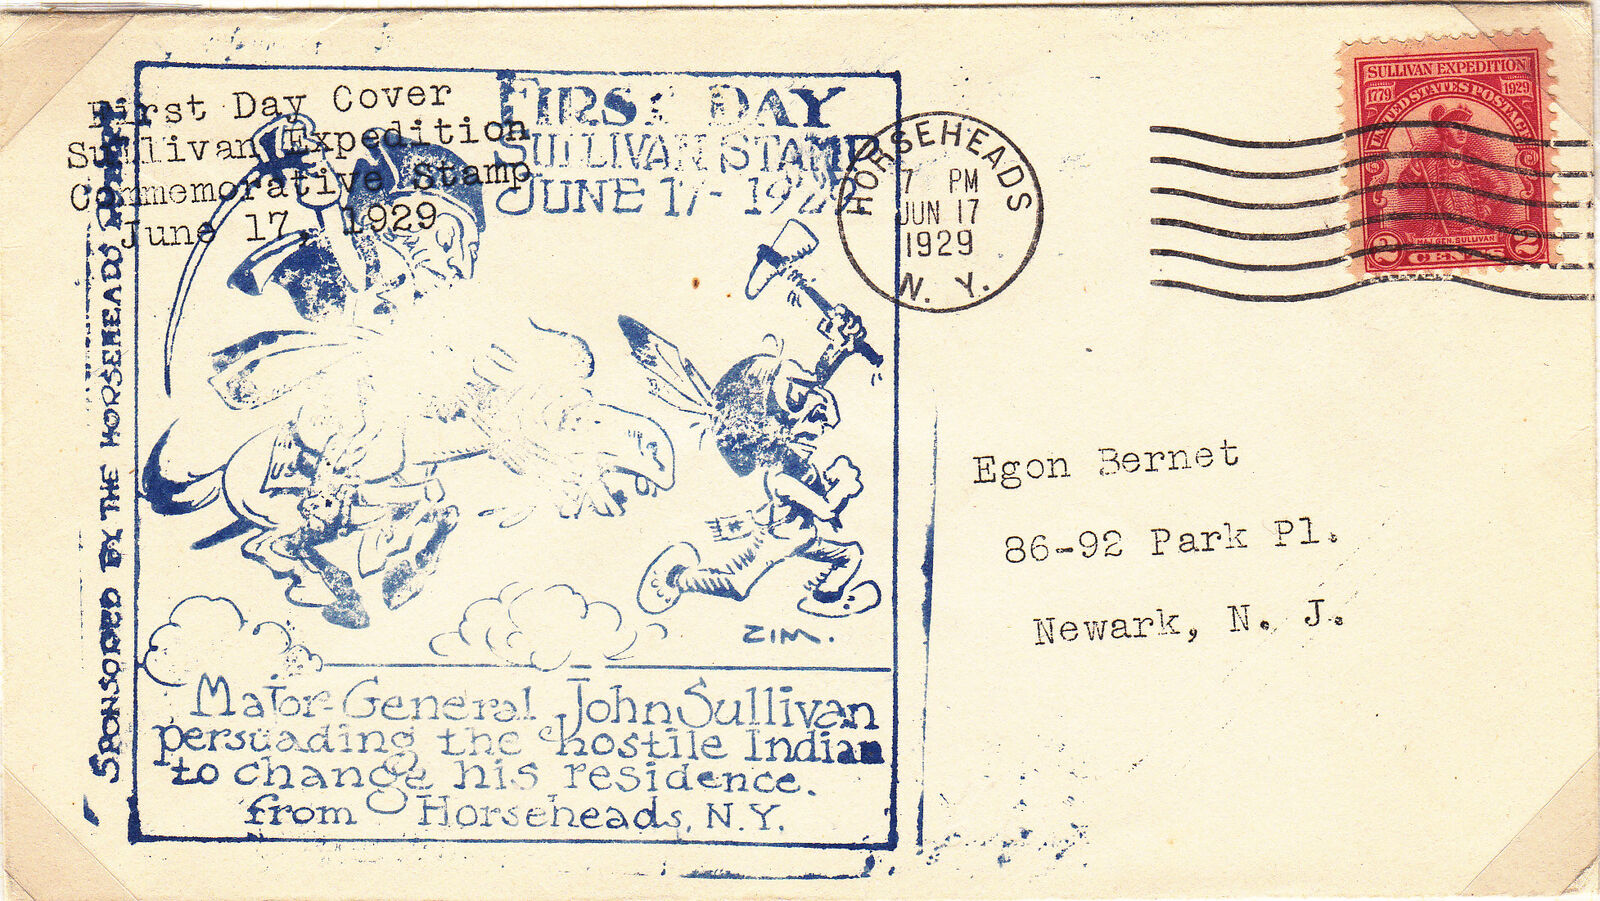 USA 1929 2c Sullivan Expedition First Day Cover with blue Horsehead cachet